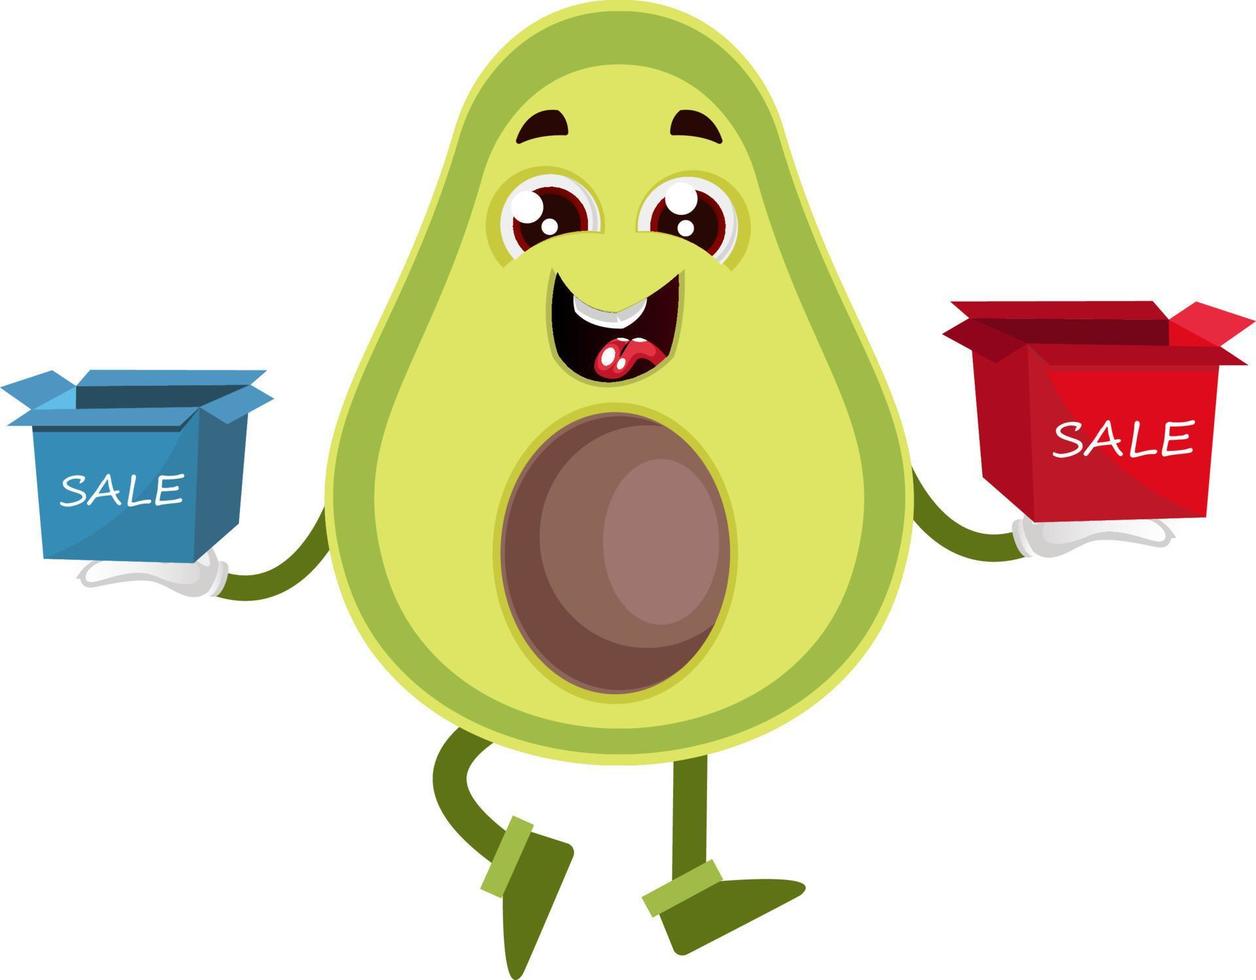 Avocado with box sale, illustration, vector on white background.